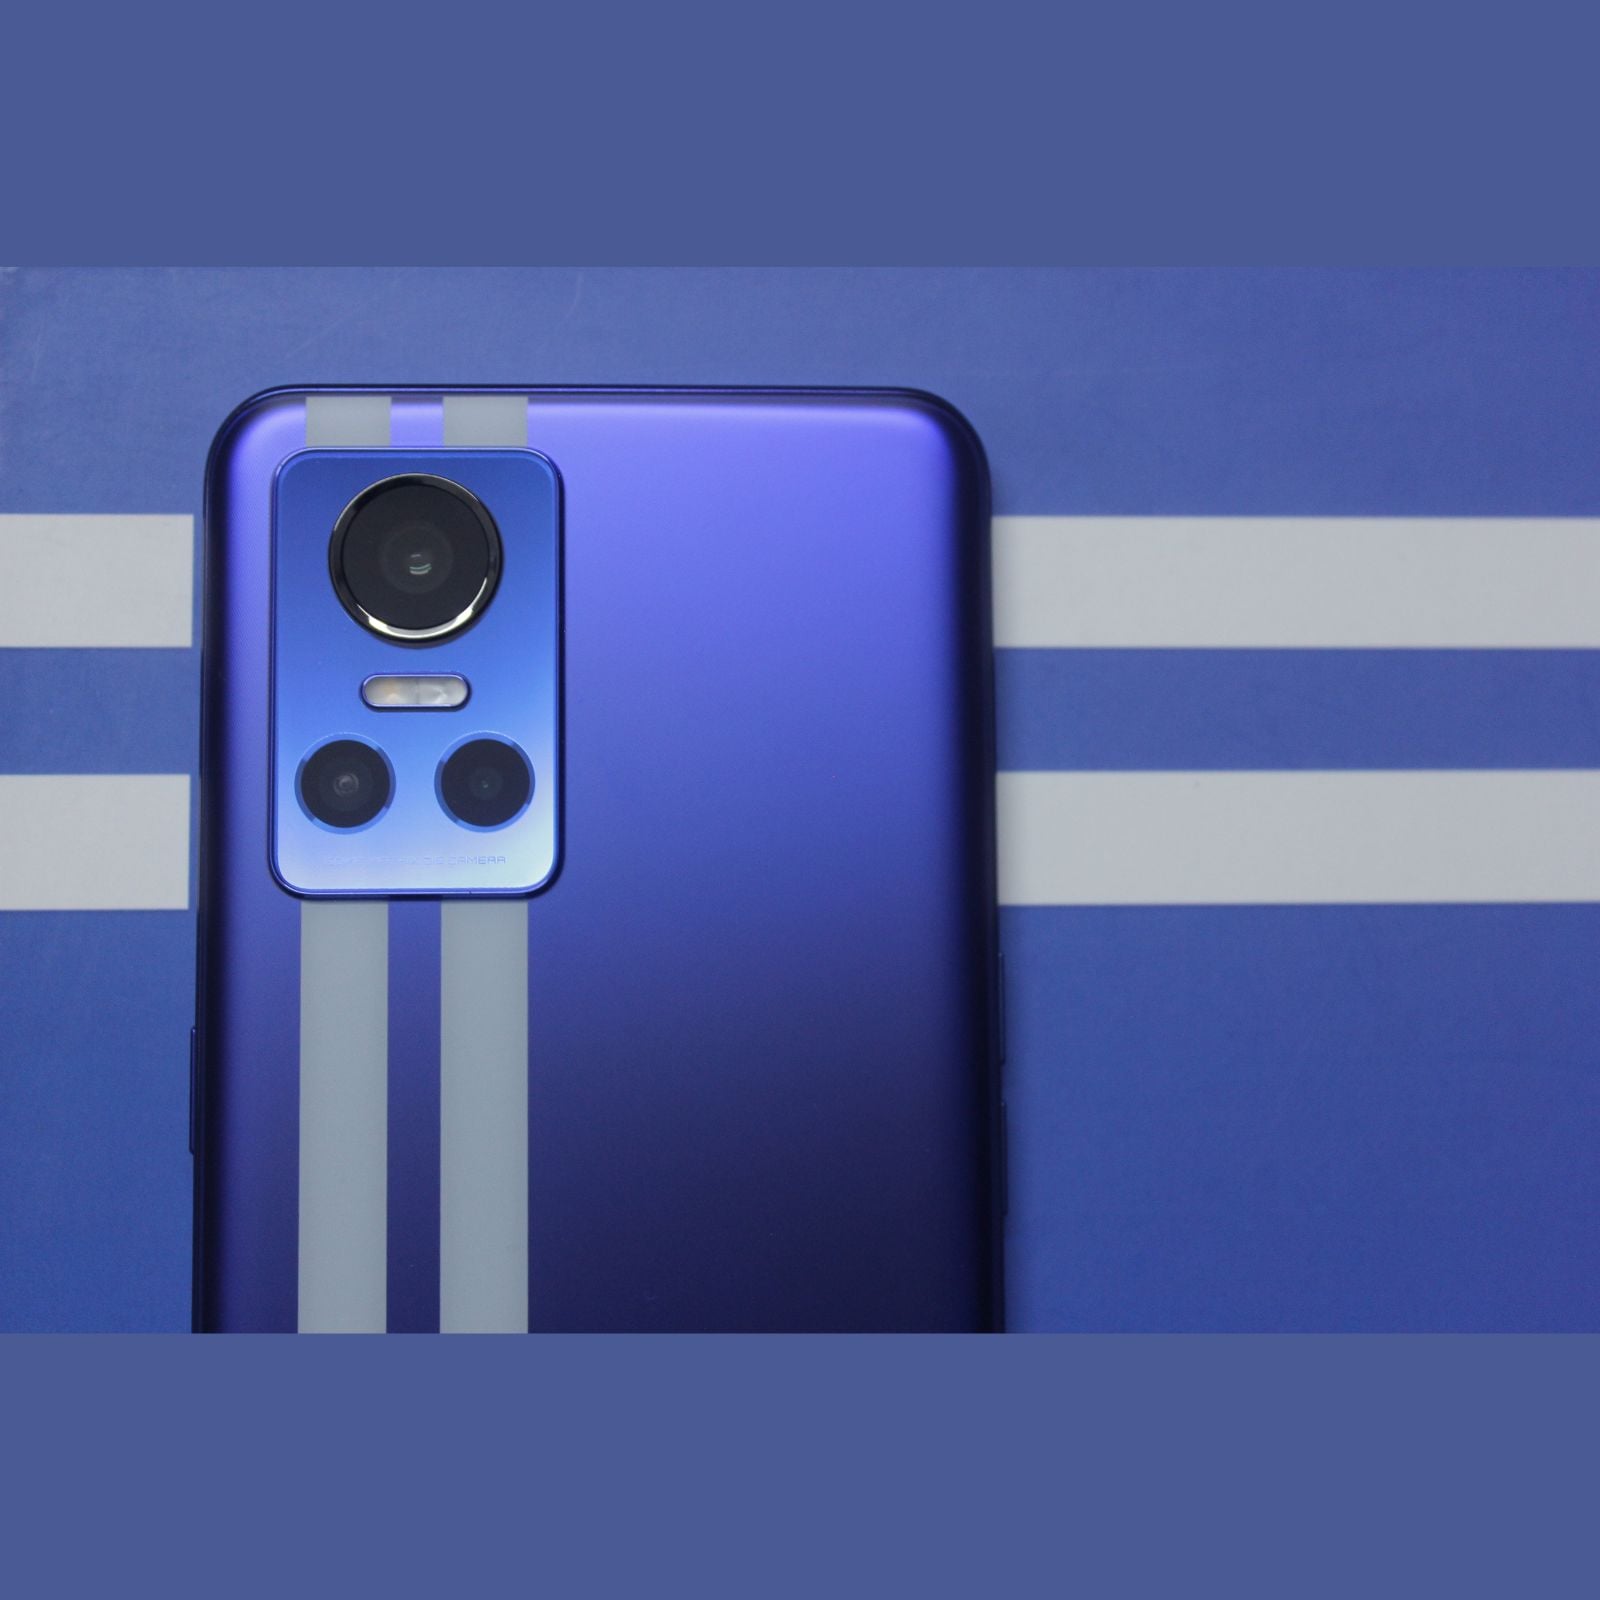 Realme GT 3 initial review: Quick, charge me up